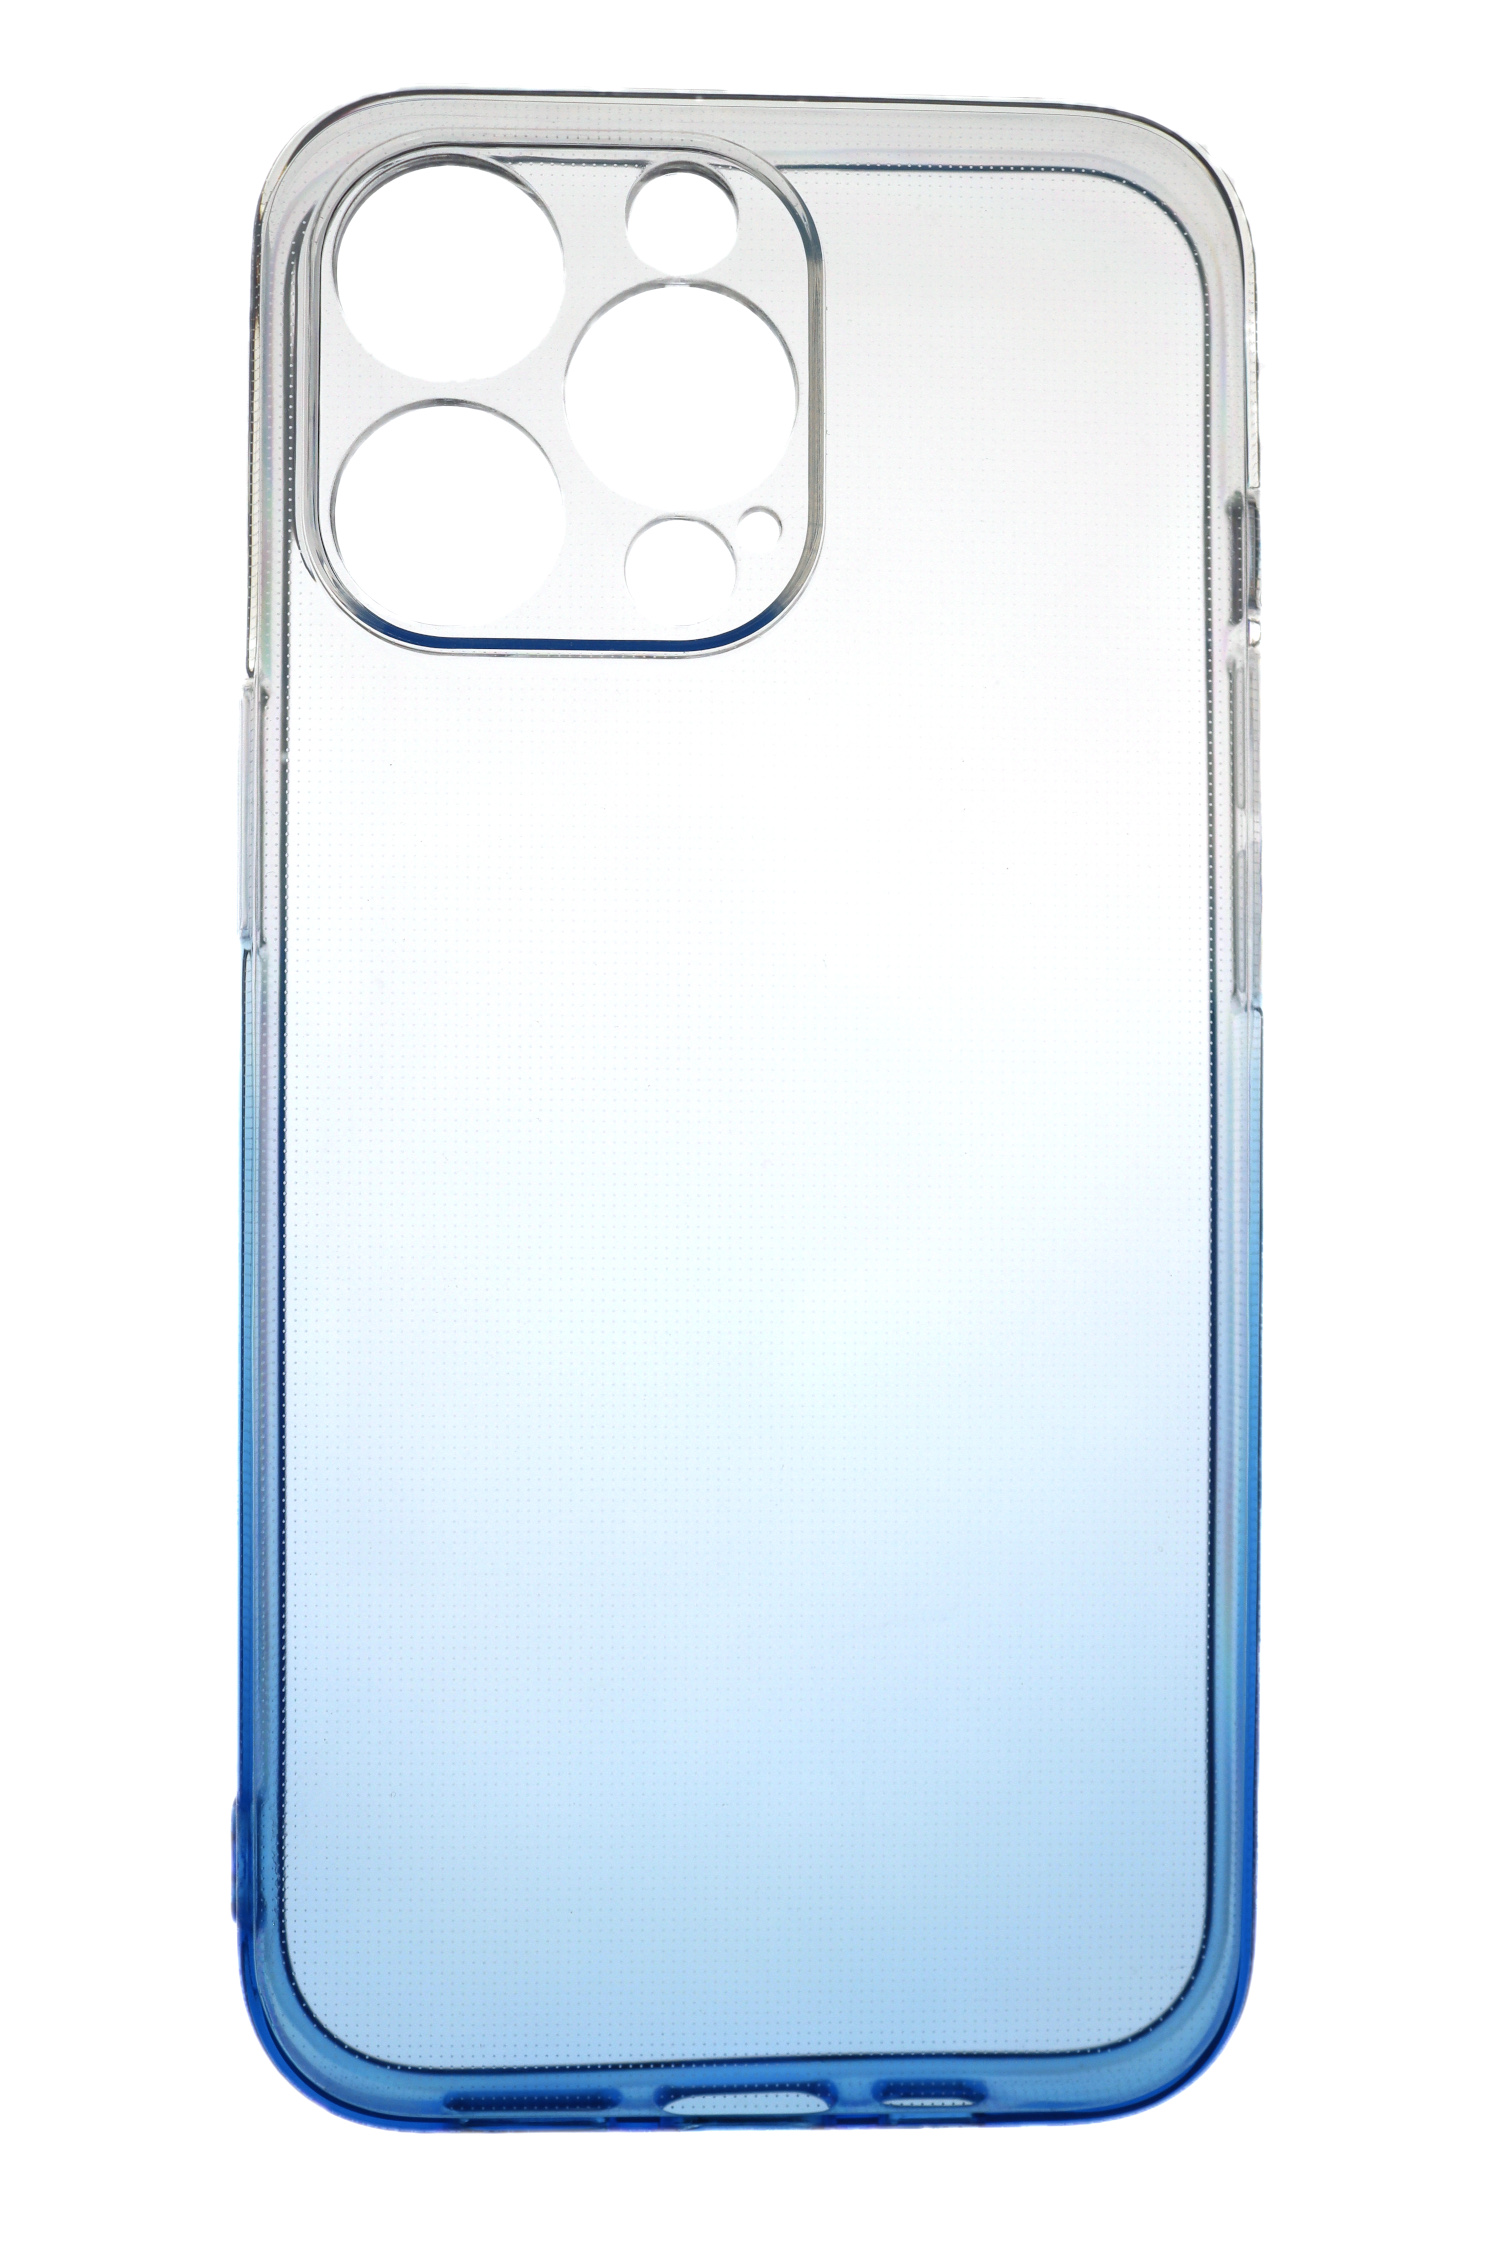 Blau, 14 mm Pro iPhone Backcover, TPU Case Max, JAMCOVER Strong, 2.0 Apple, Transparent